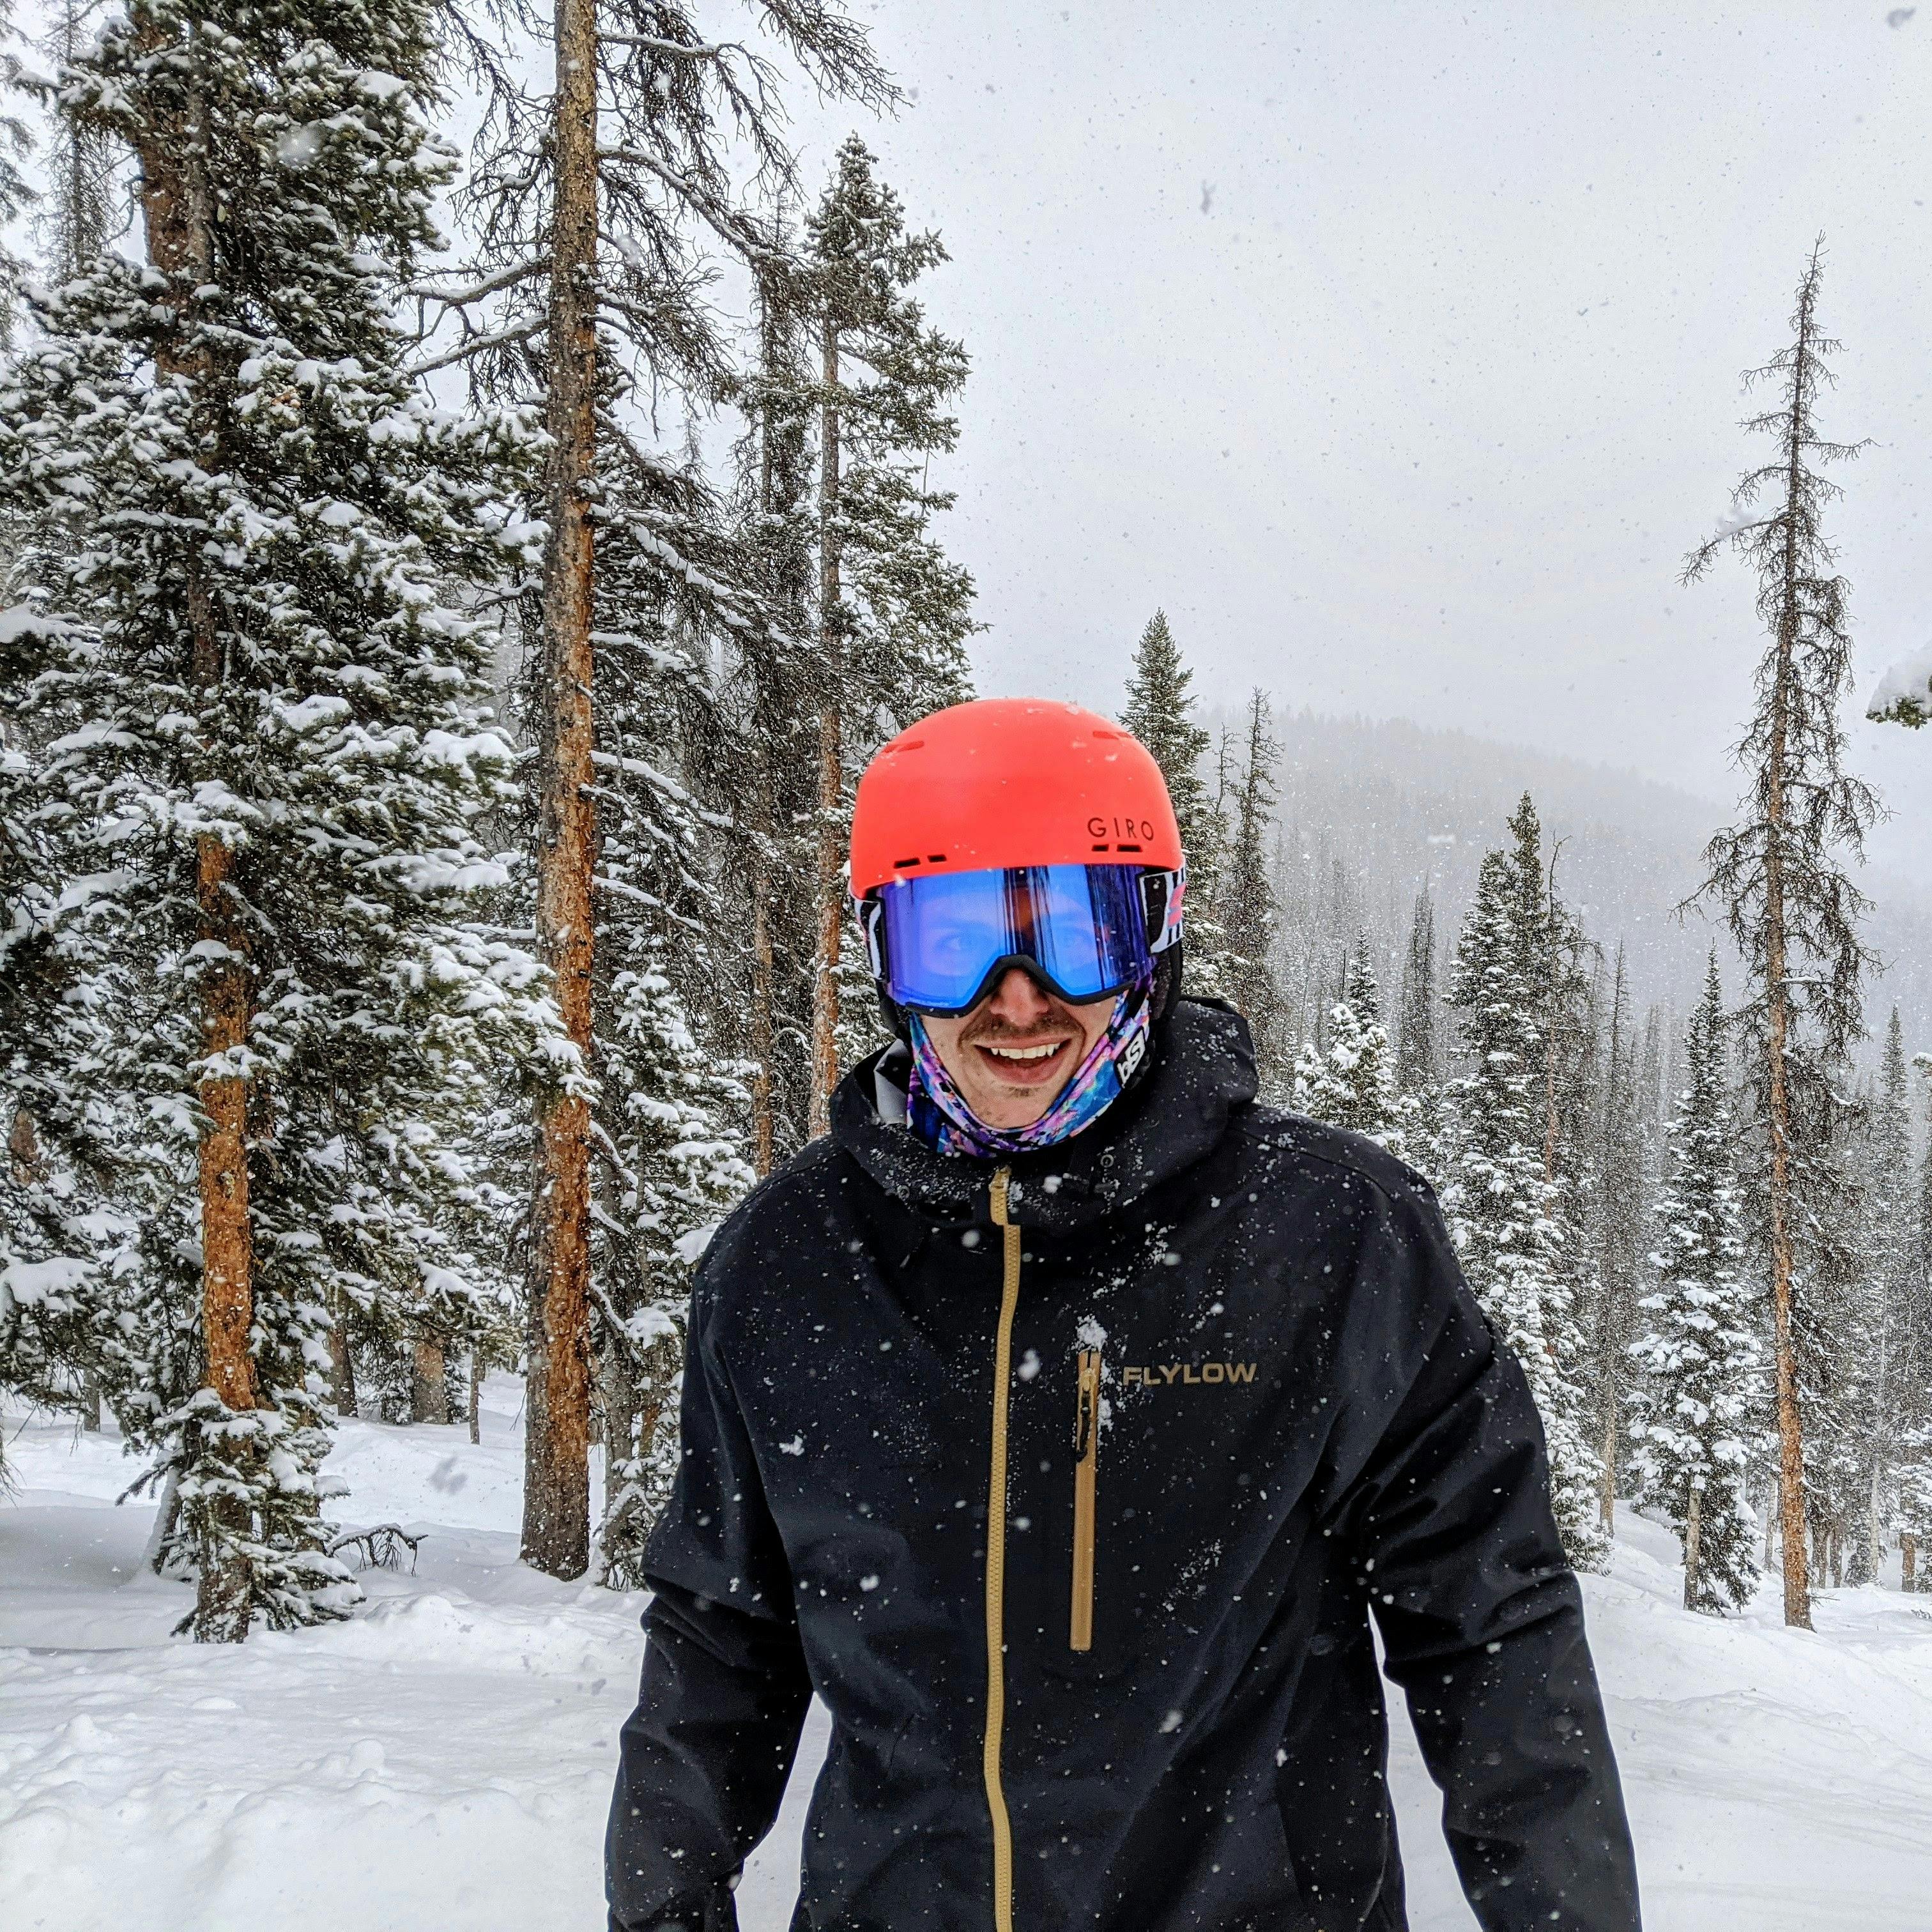 A skier wearing the Giro Emerge helmet smiling at the camera. There is snow falling and snowy trees behind him. 